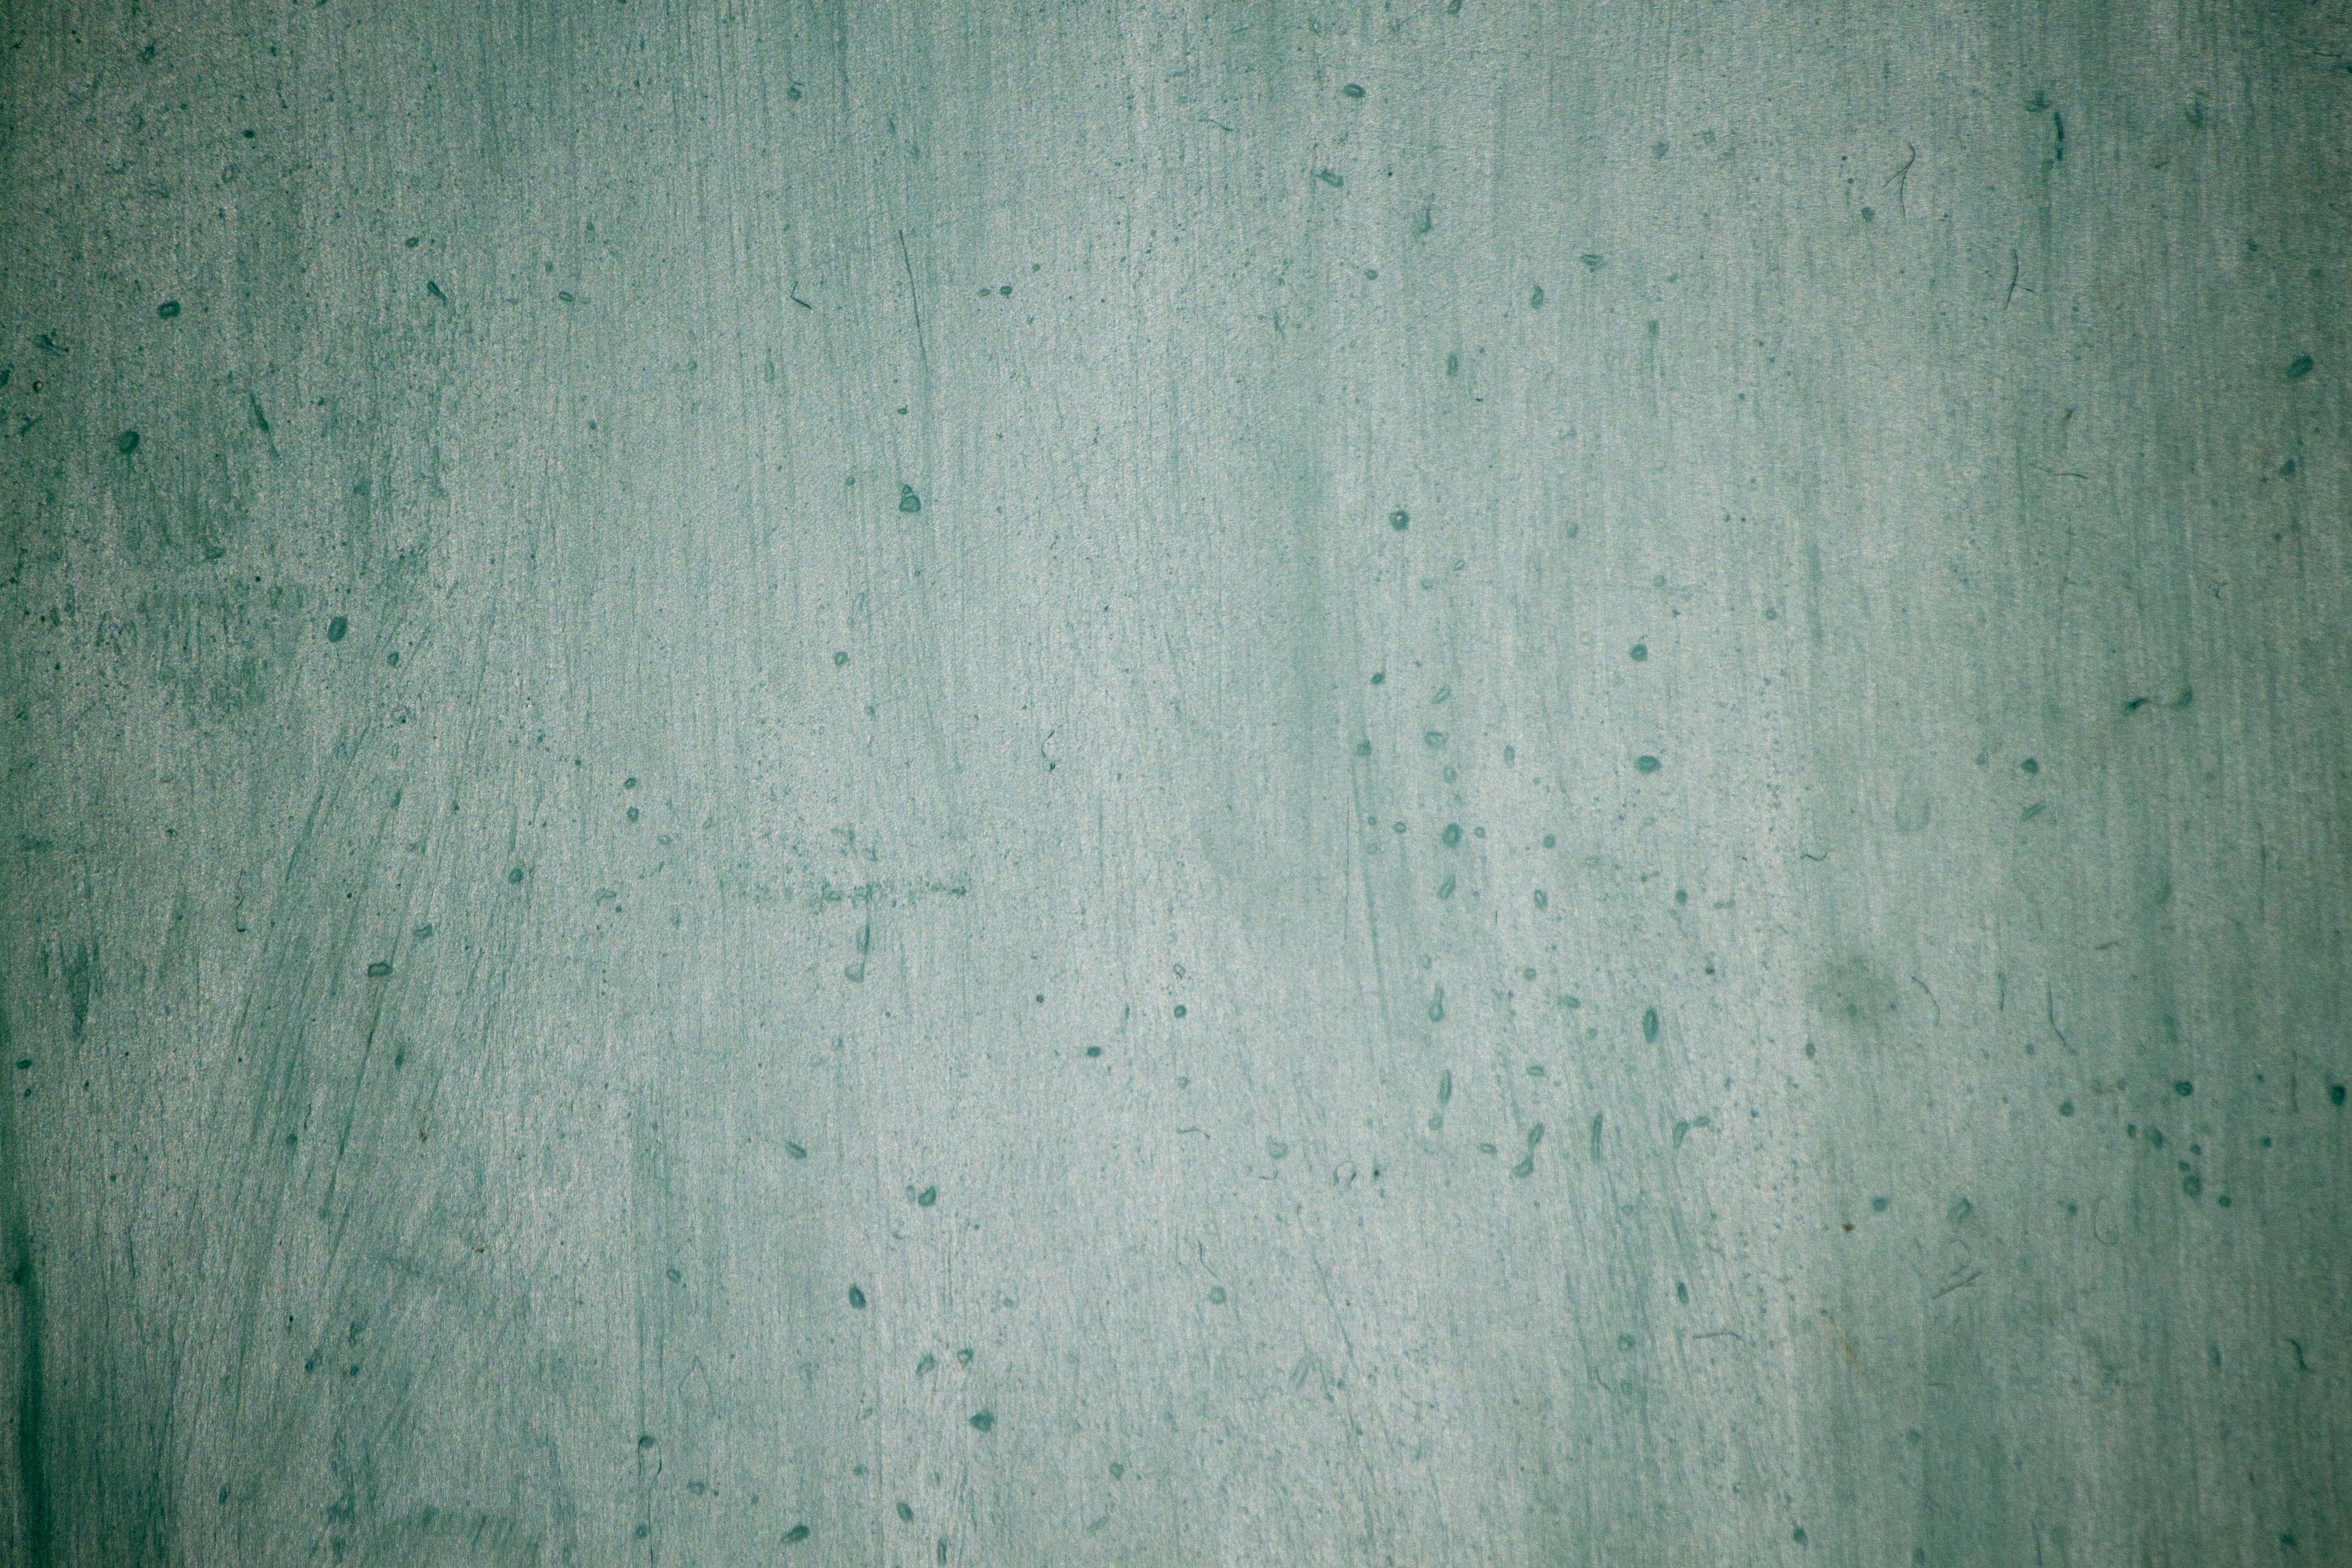 Green wall texture, Abstract, Blue, Design, Dirty, HQ Photo